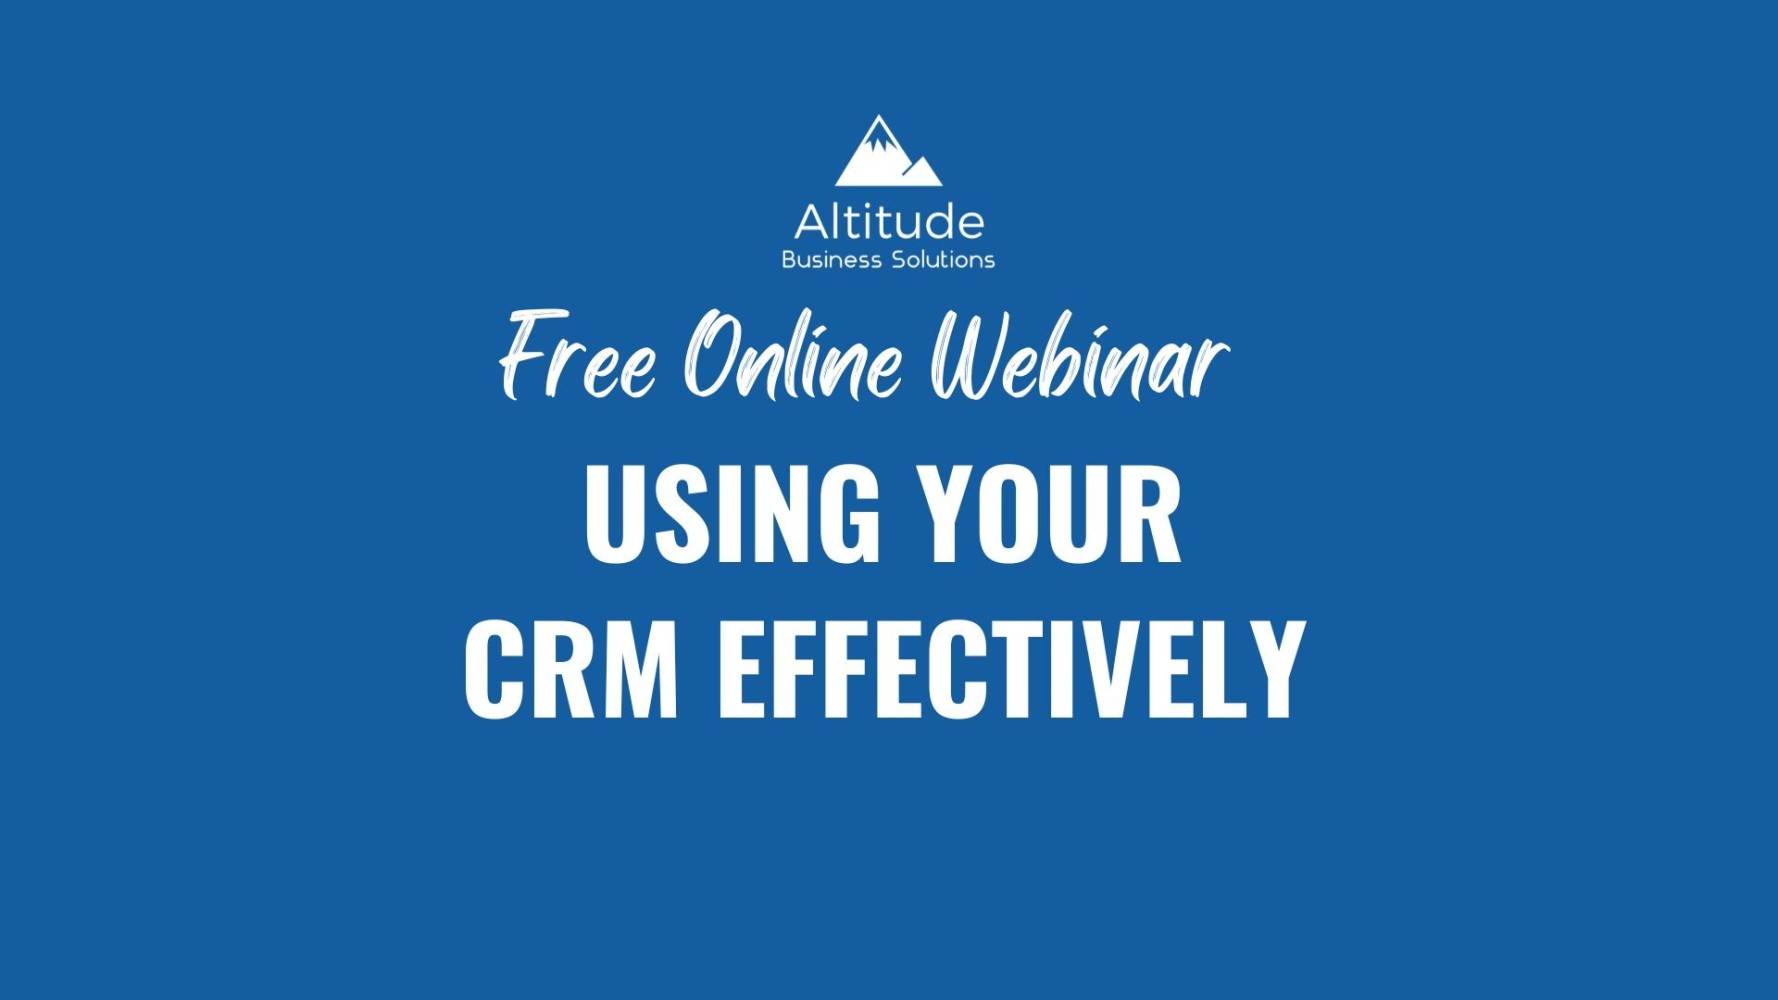 Webinar Recording - Using your CRM Effectively